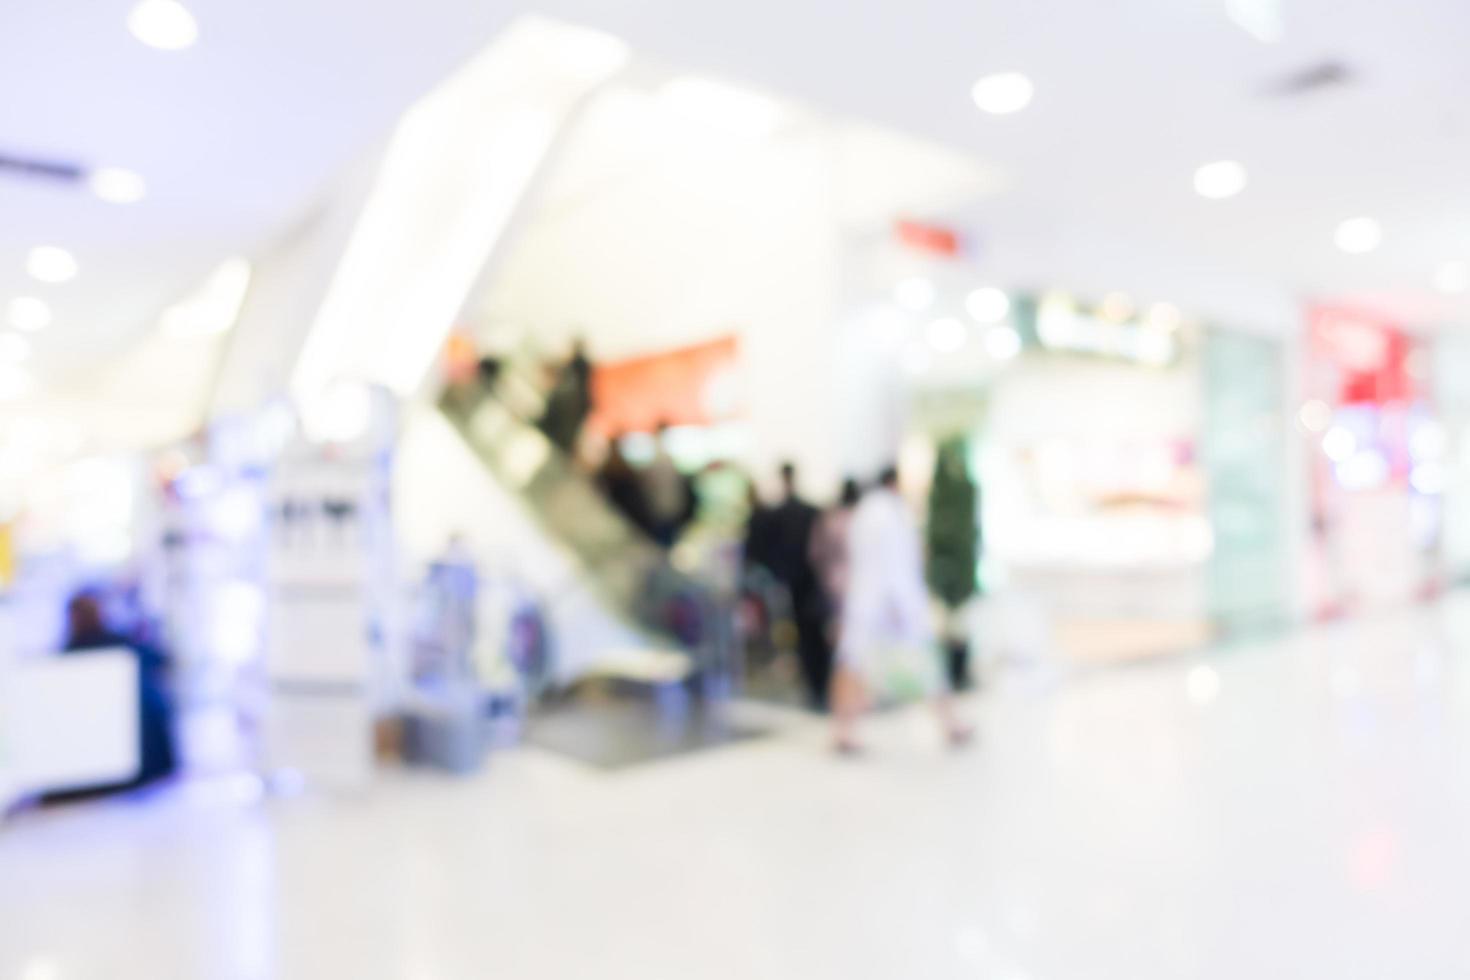 Blur shopping mall and retail store interior for background photo